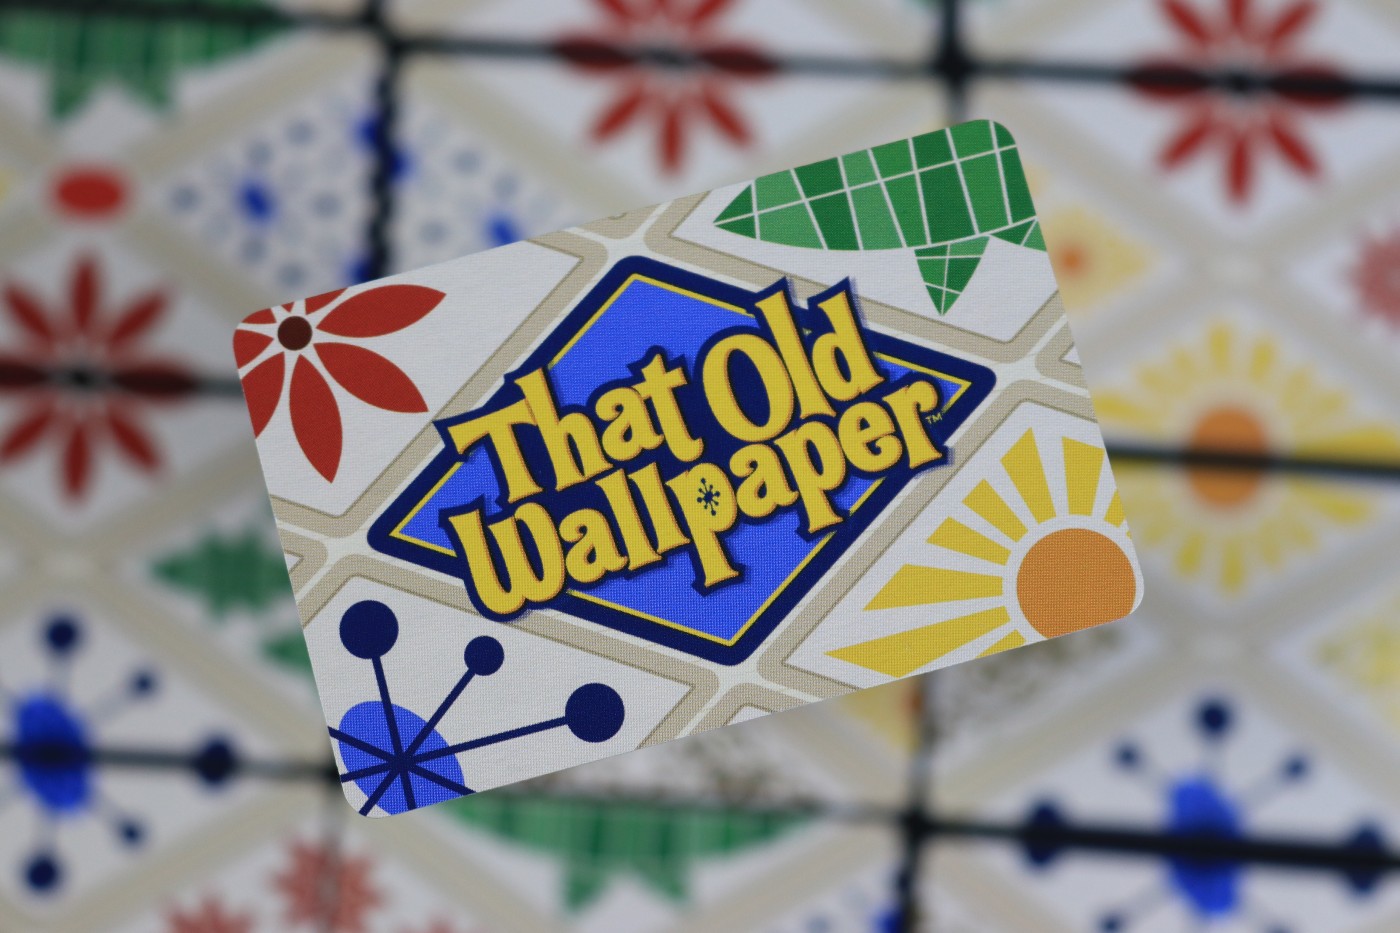 That Old Wallpaper Review